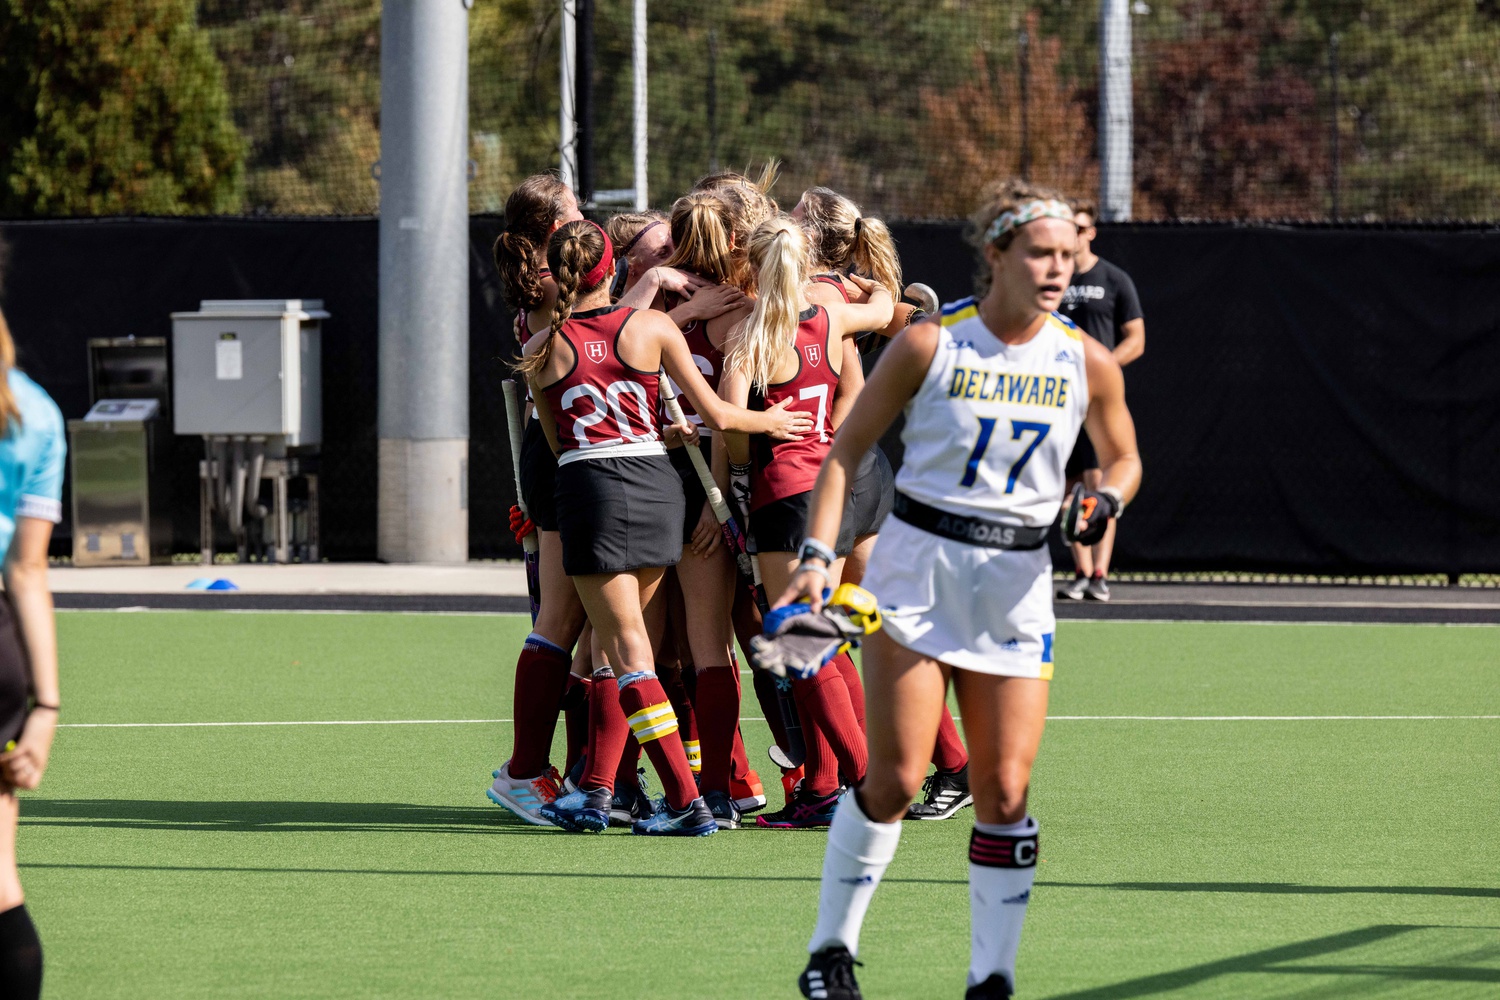 The Harvard field hockey team celebrates a goal on October 16, 2022 at home against Delaware.